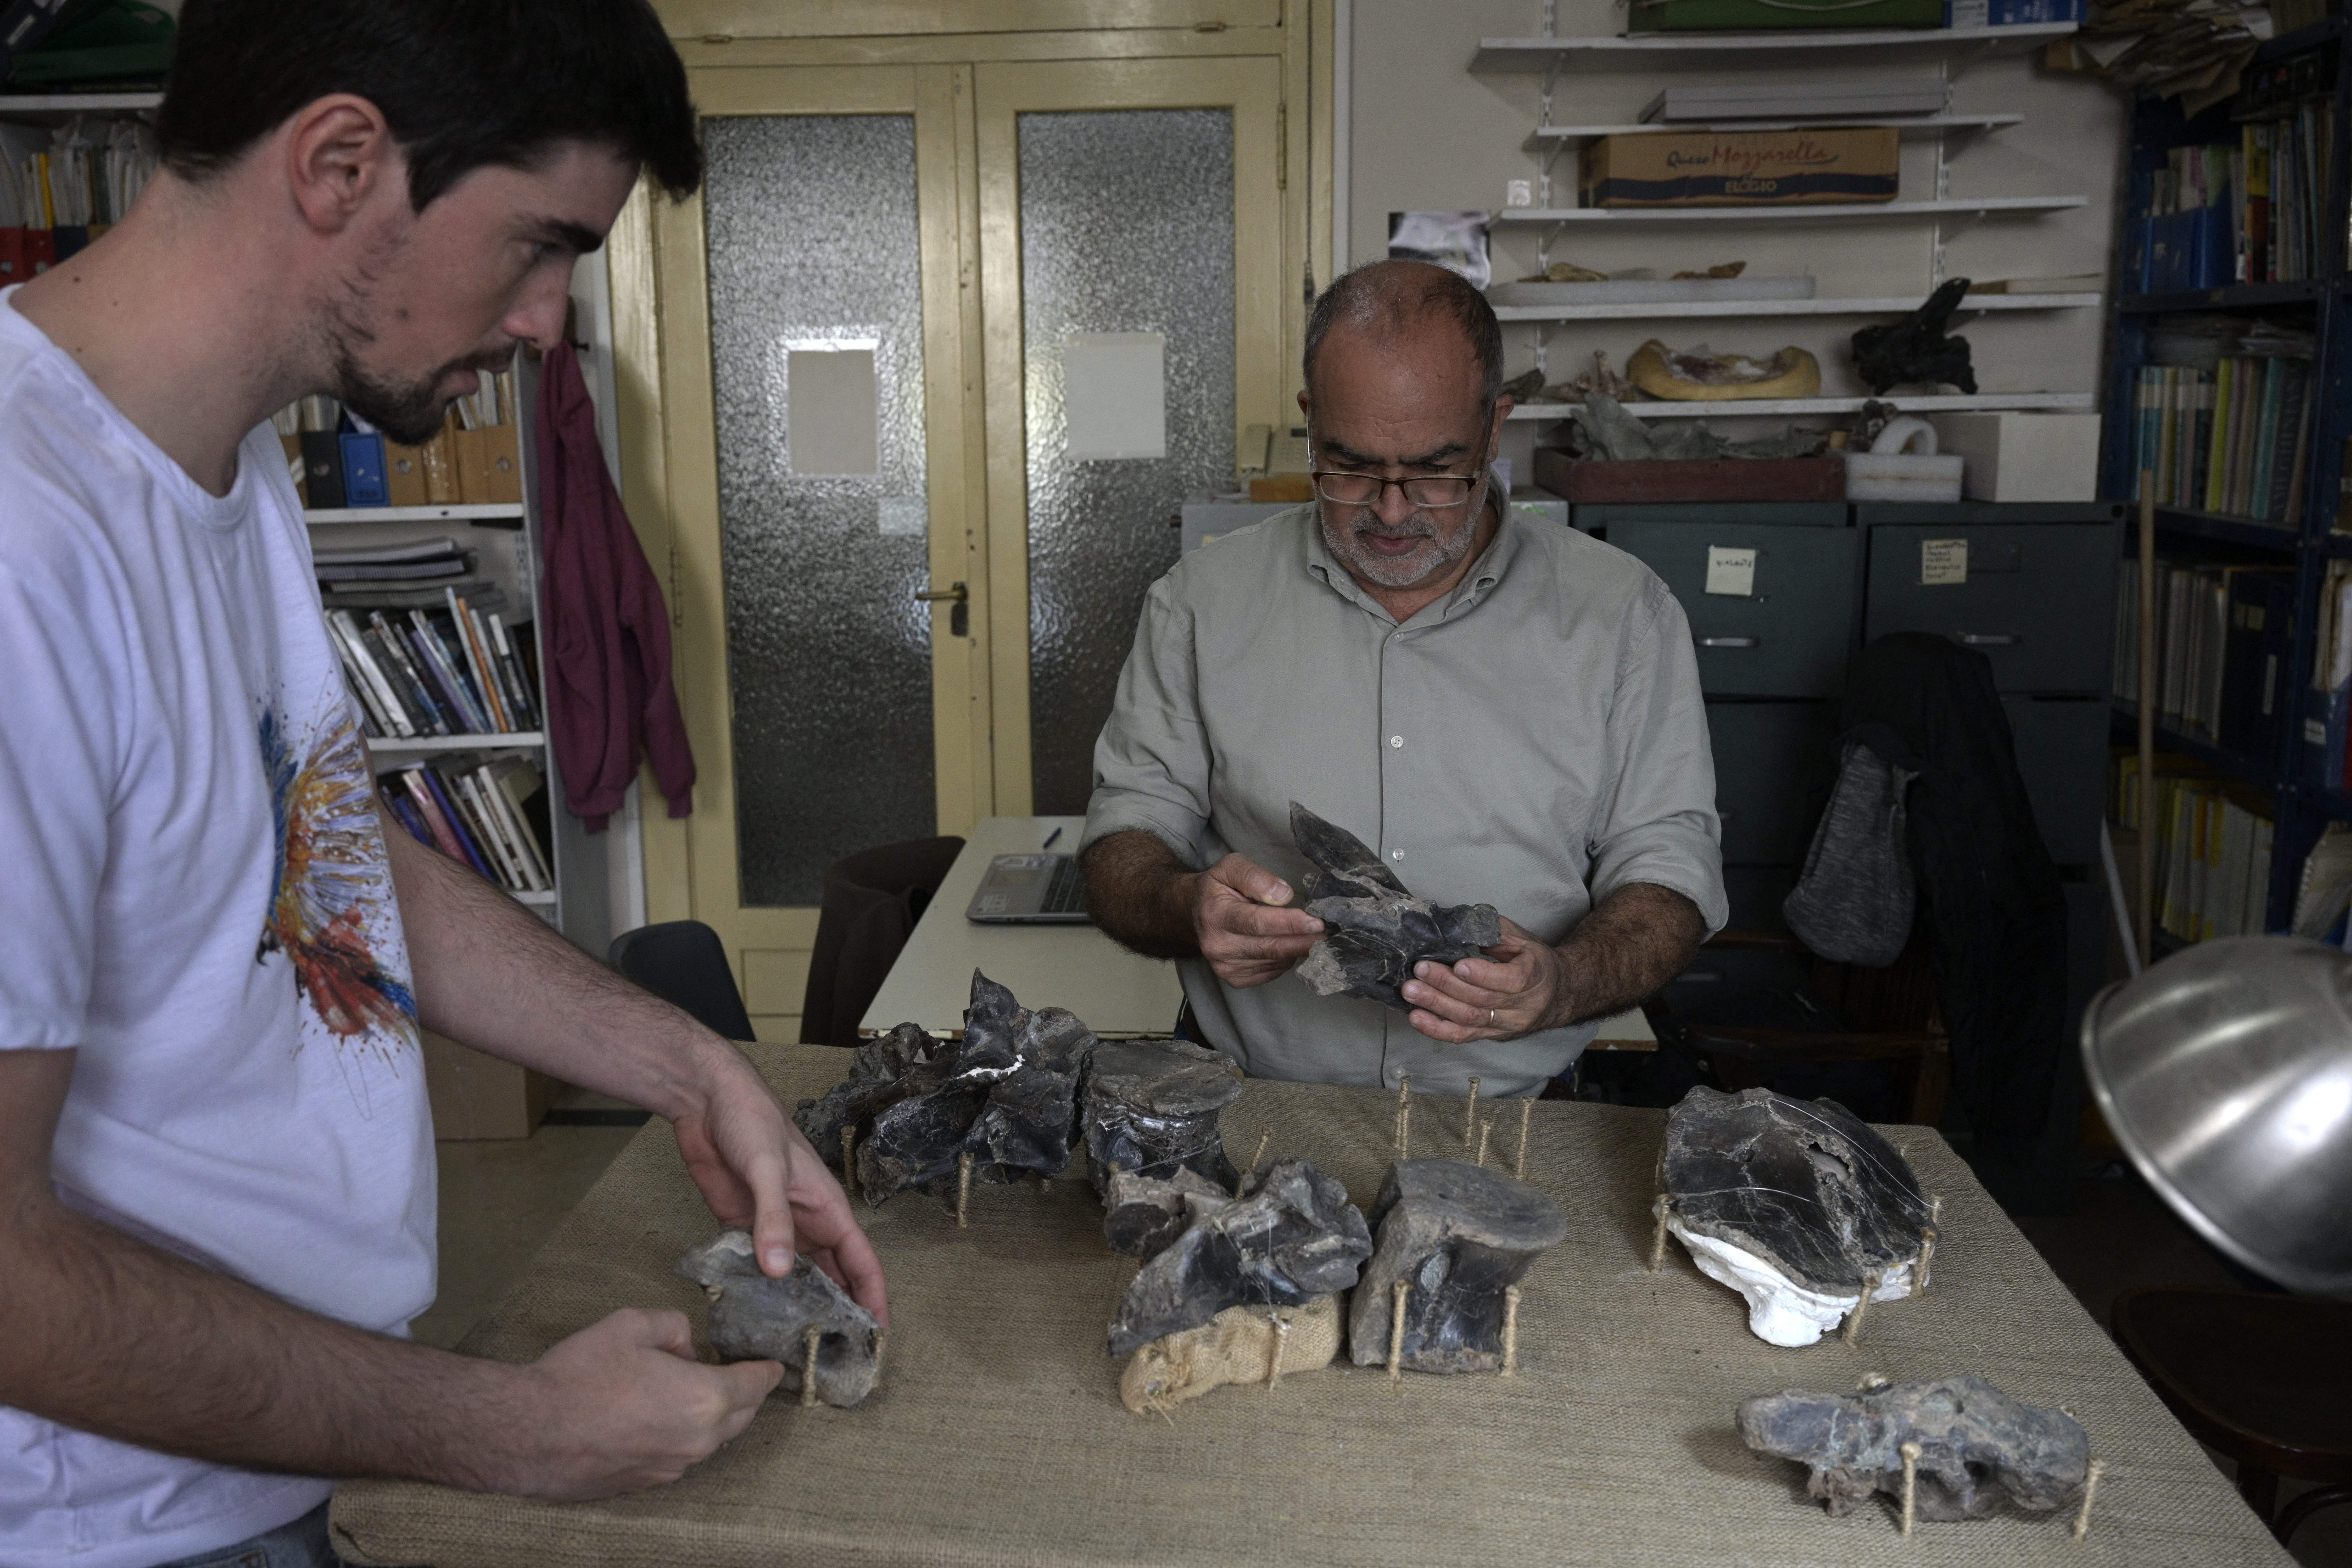 Argentine paleontologists Mauro Aranciaga (left) and Fernando Novas check fossilised bones of ‘Maip macrothorax’, the newly identified megaraptor dinosaur that inhabited the Argentinian Patagonian, at the Bernardino Rivadavia Argentine Museum of Natural Science, in Buenos Aires on 2 May 2022